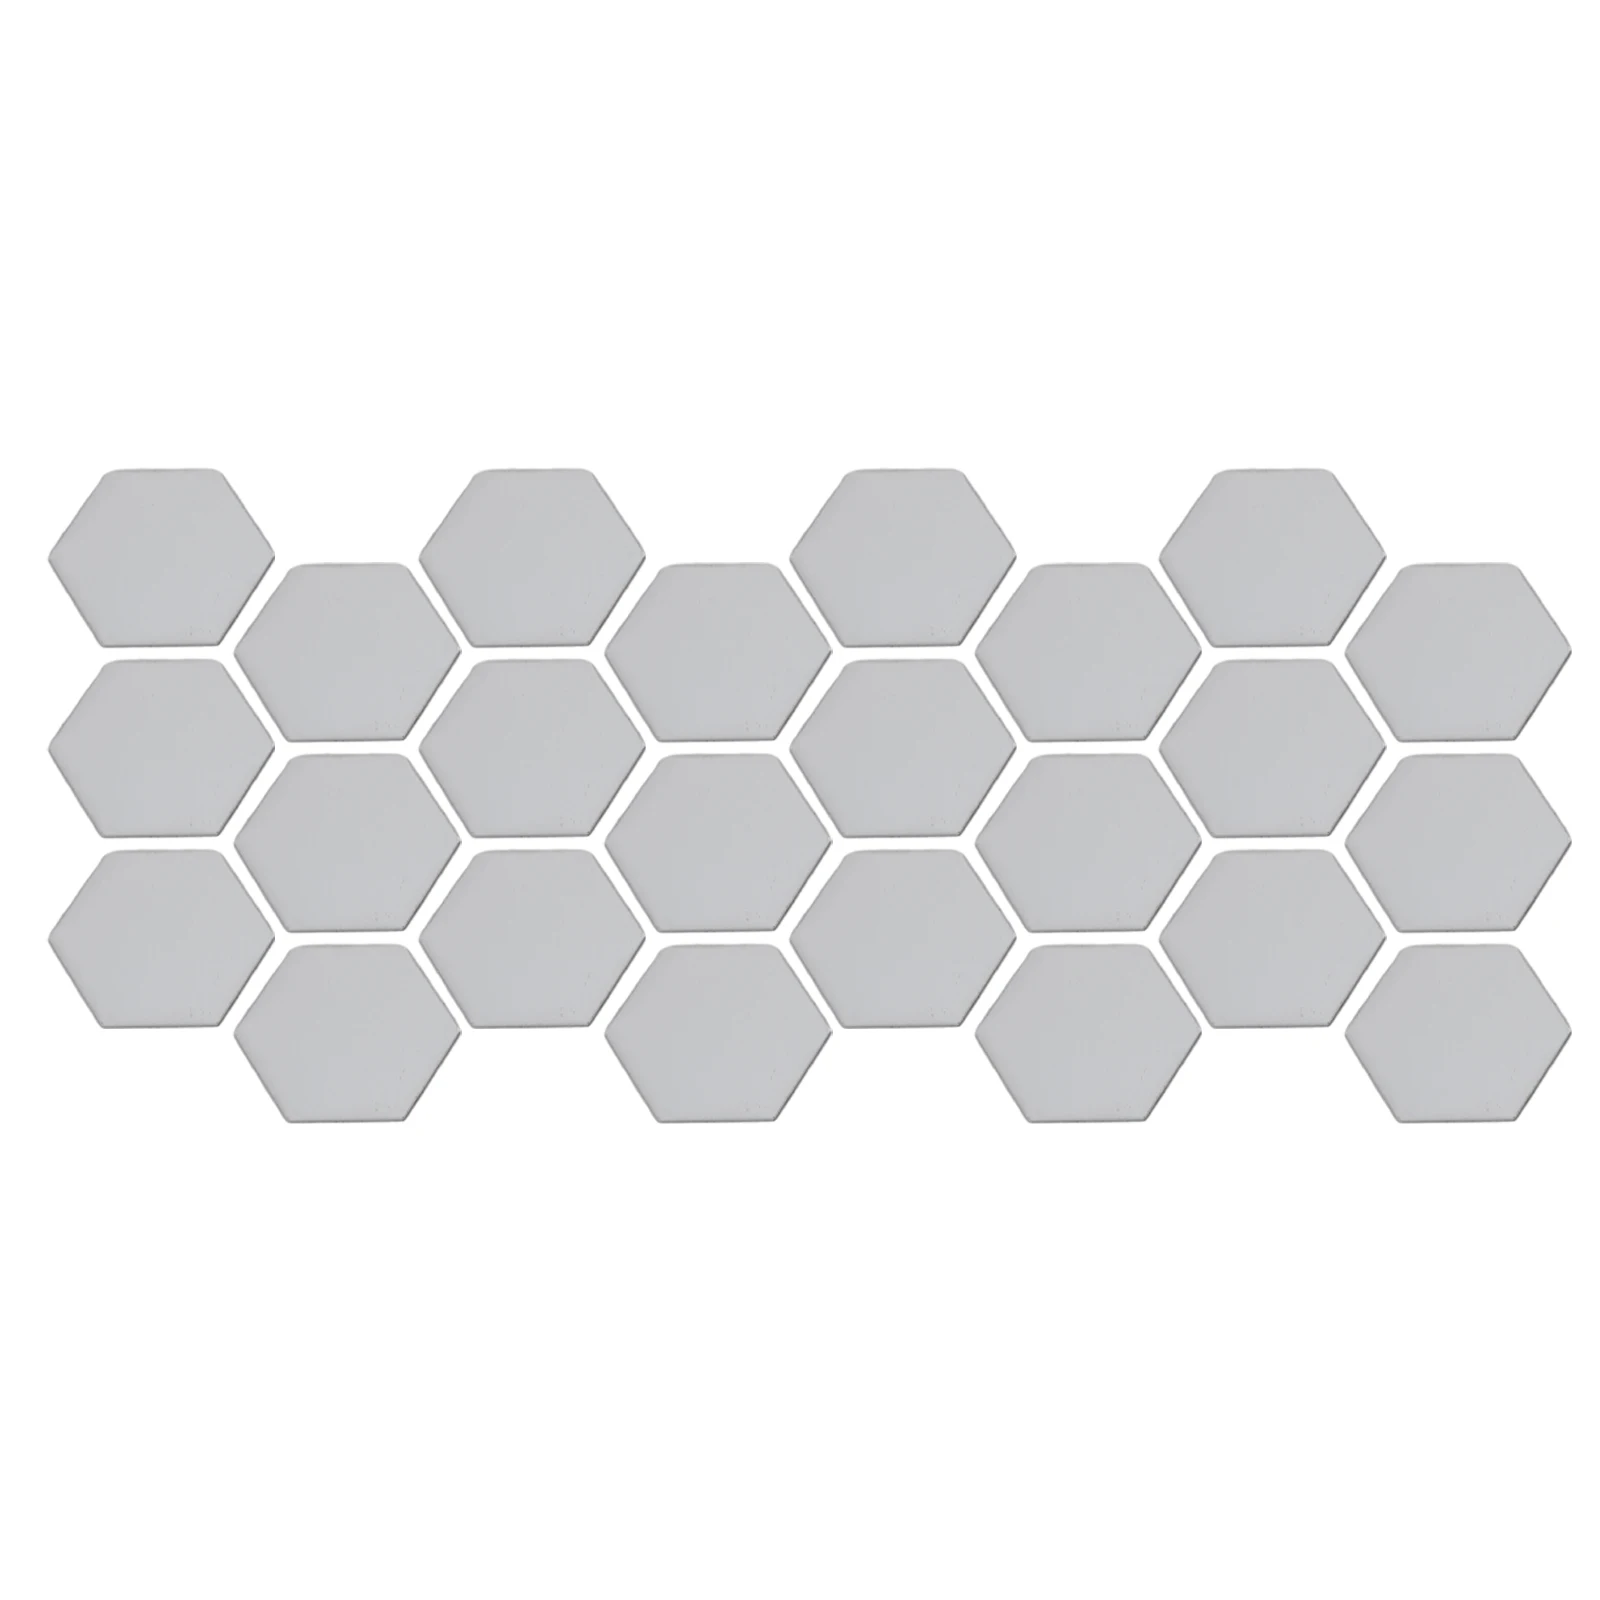 ​24pcs 3D Hexagon Mirror Wall Sticker Art Tile Decal Home Living Room Decor User-friendly Design And Convenient-animated-img